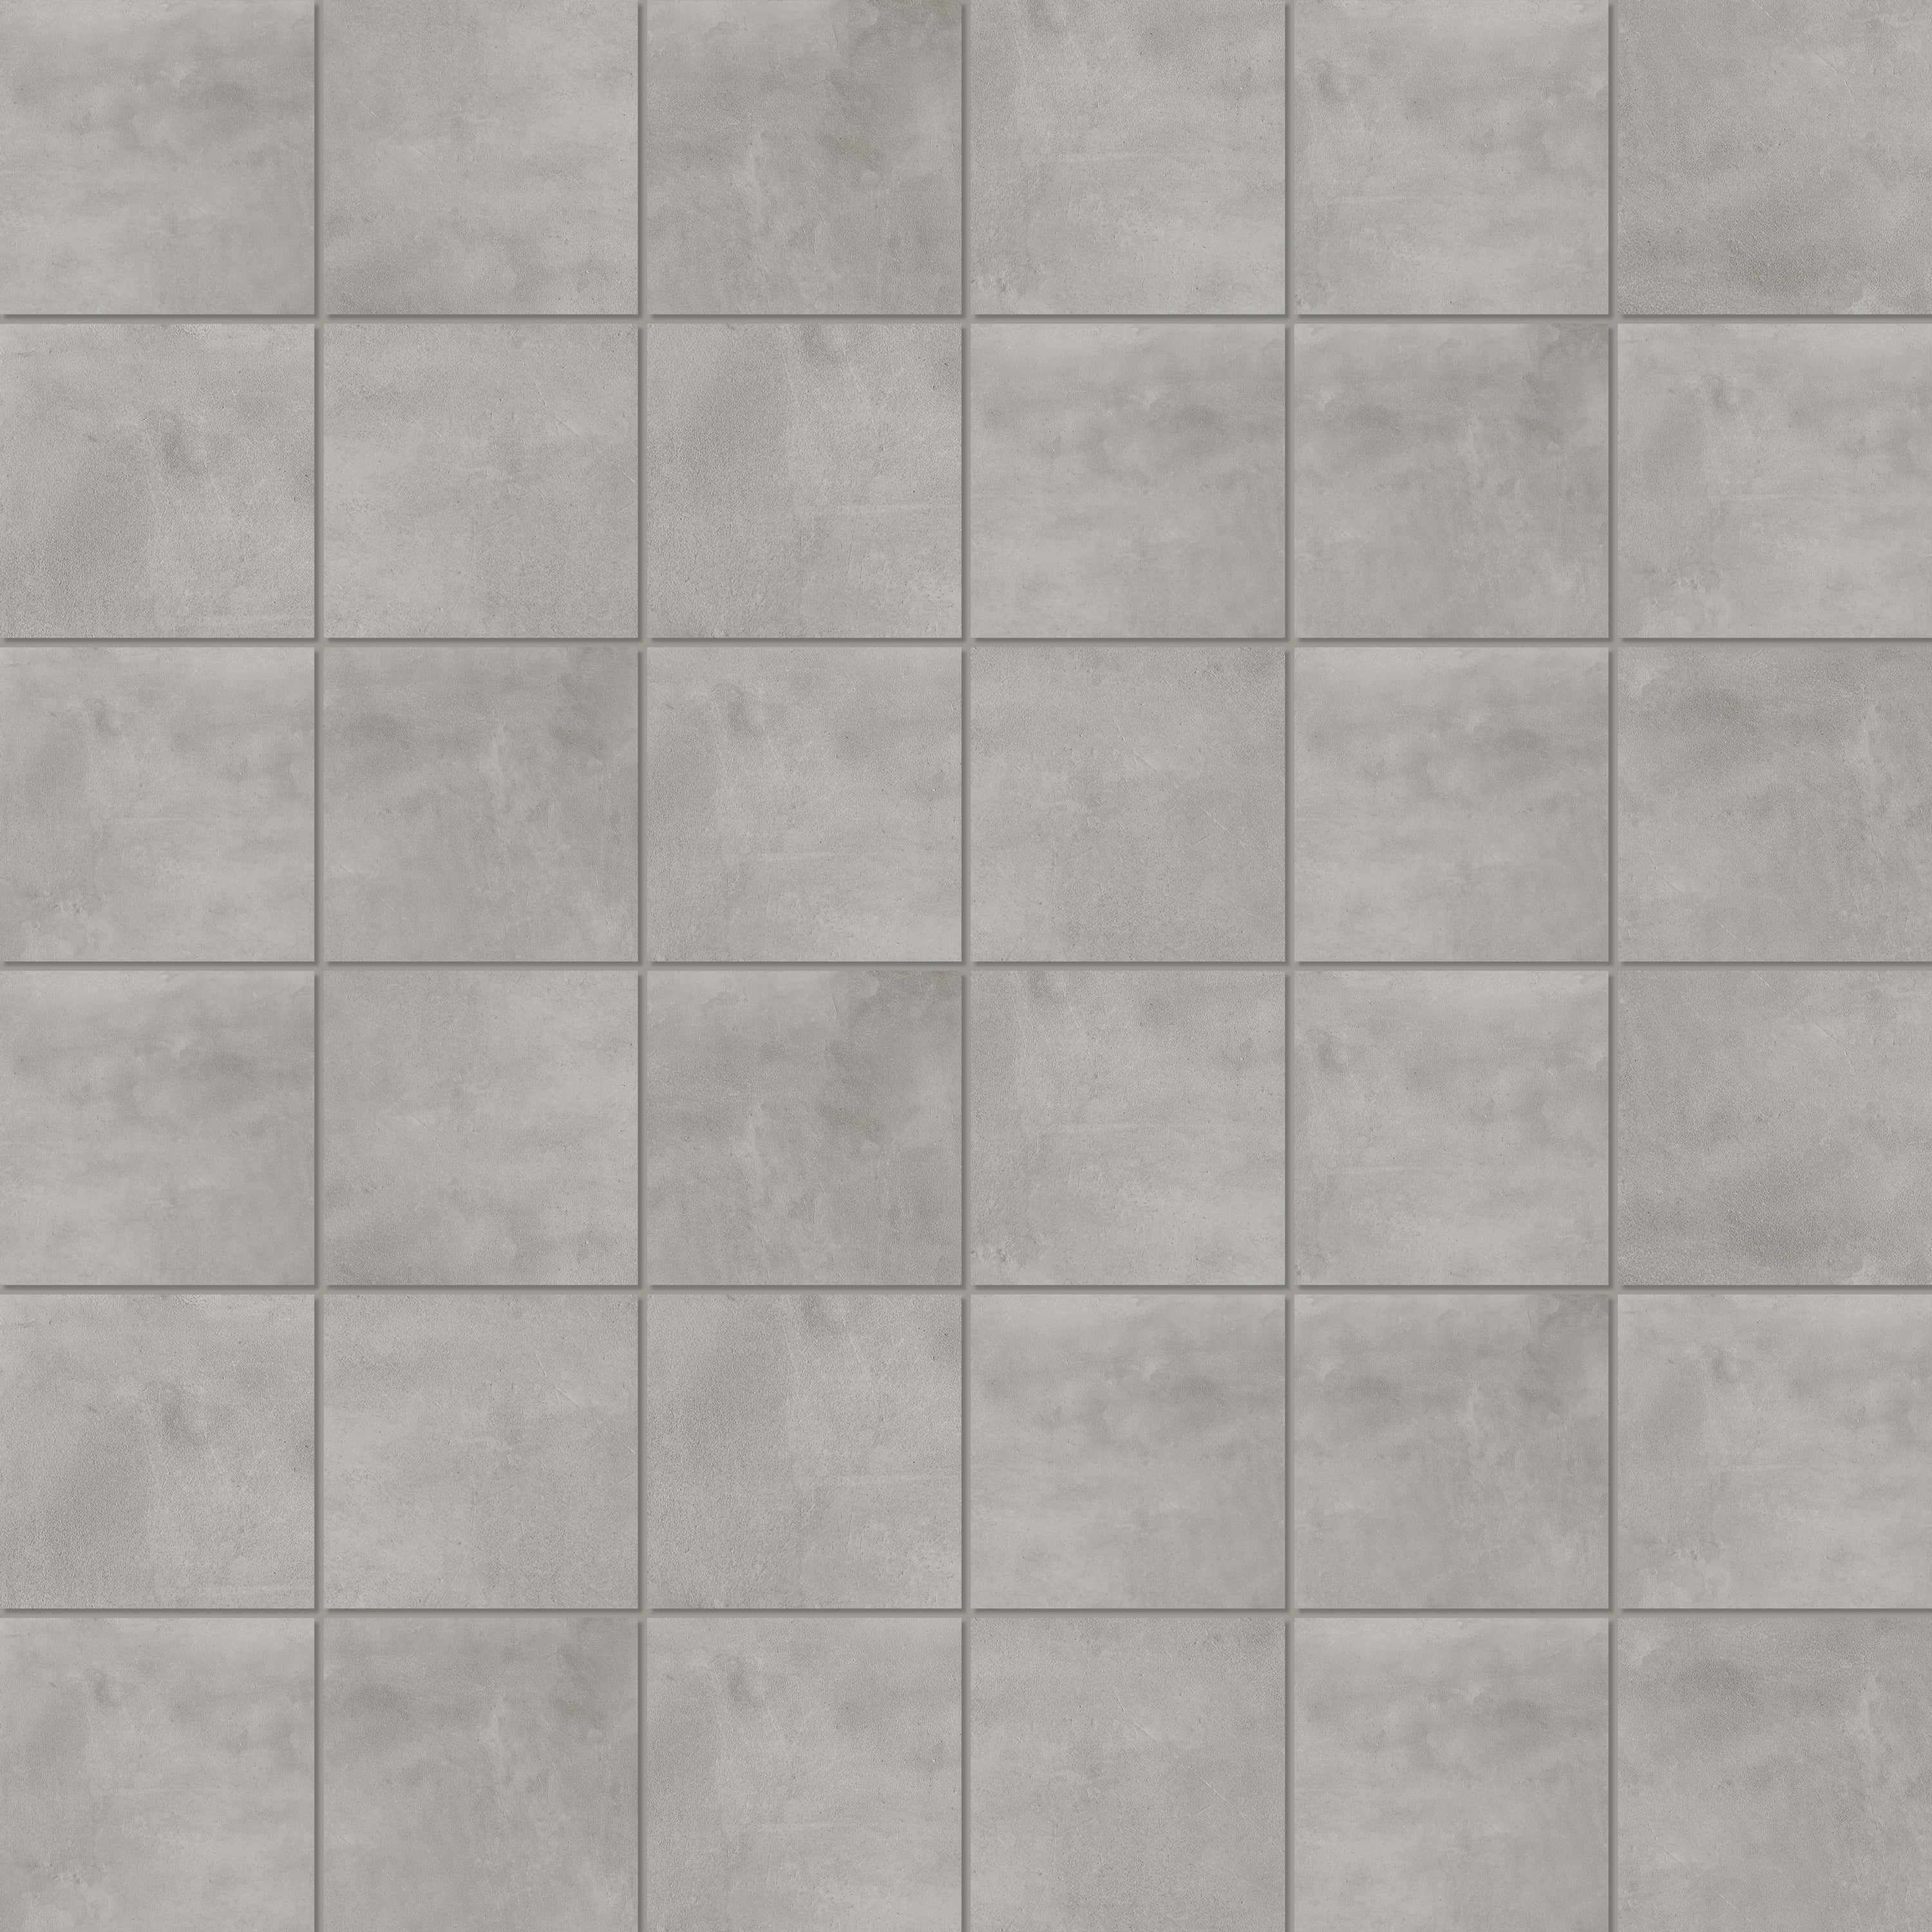 landmark contract new york concrete straight stack 2x2 mosaic 12x12x8mm matte pressed porcelain tile distributed by surface group international